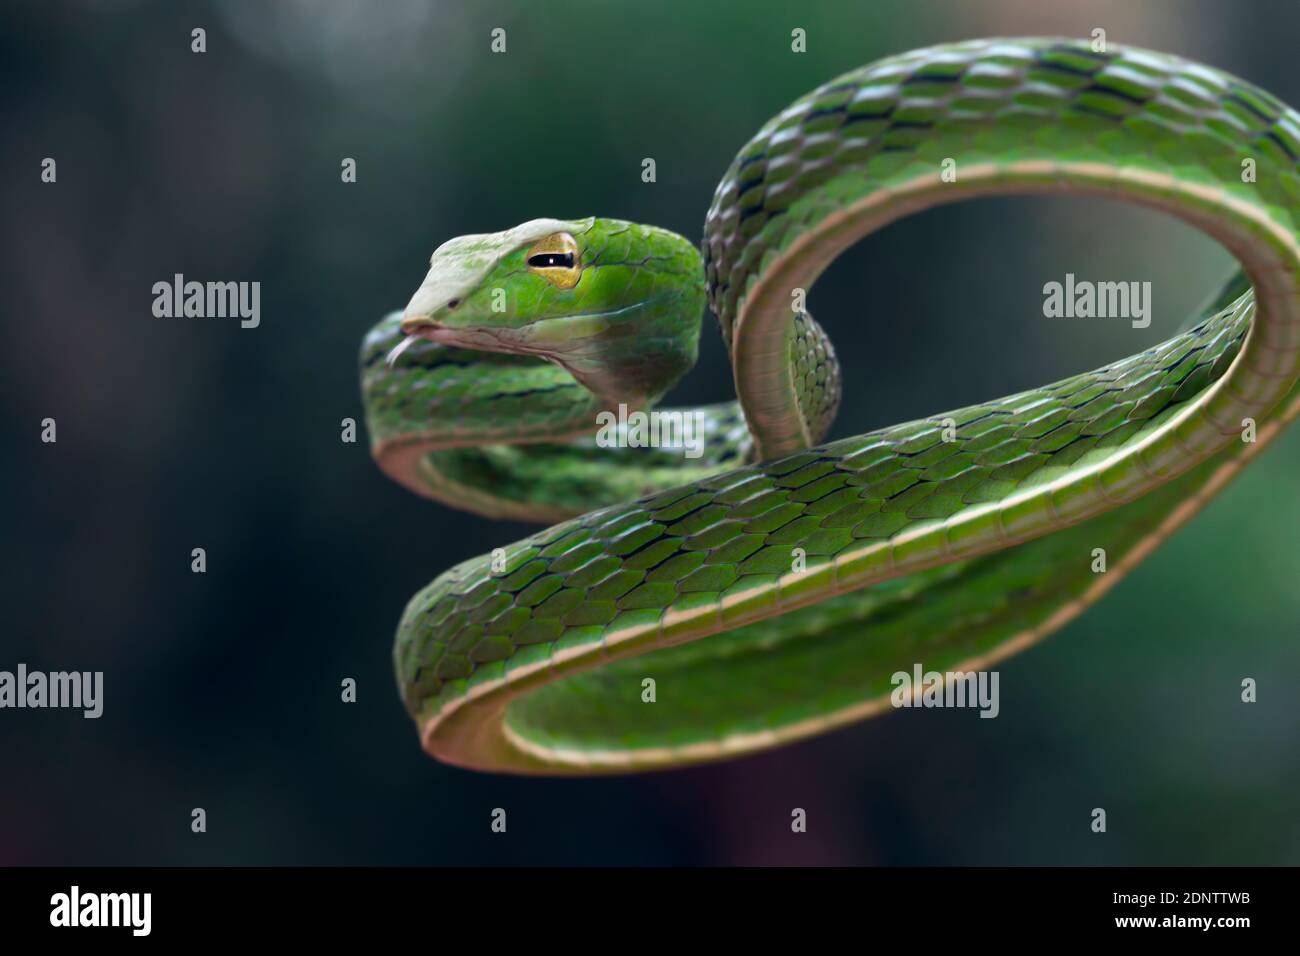 Close-up of an Asian vine snake on a branch, Indonesia Stock Photo